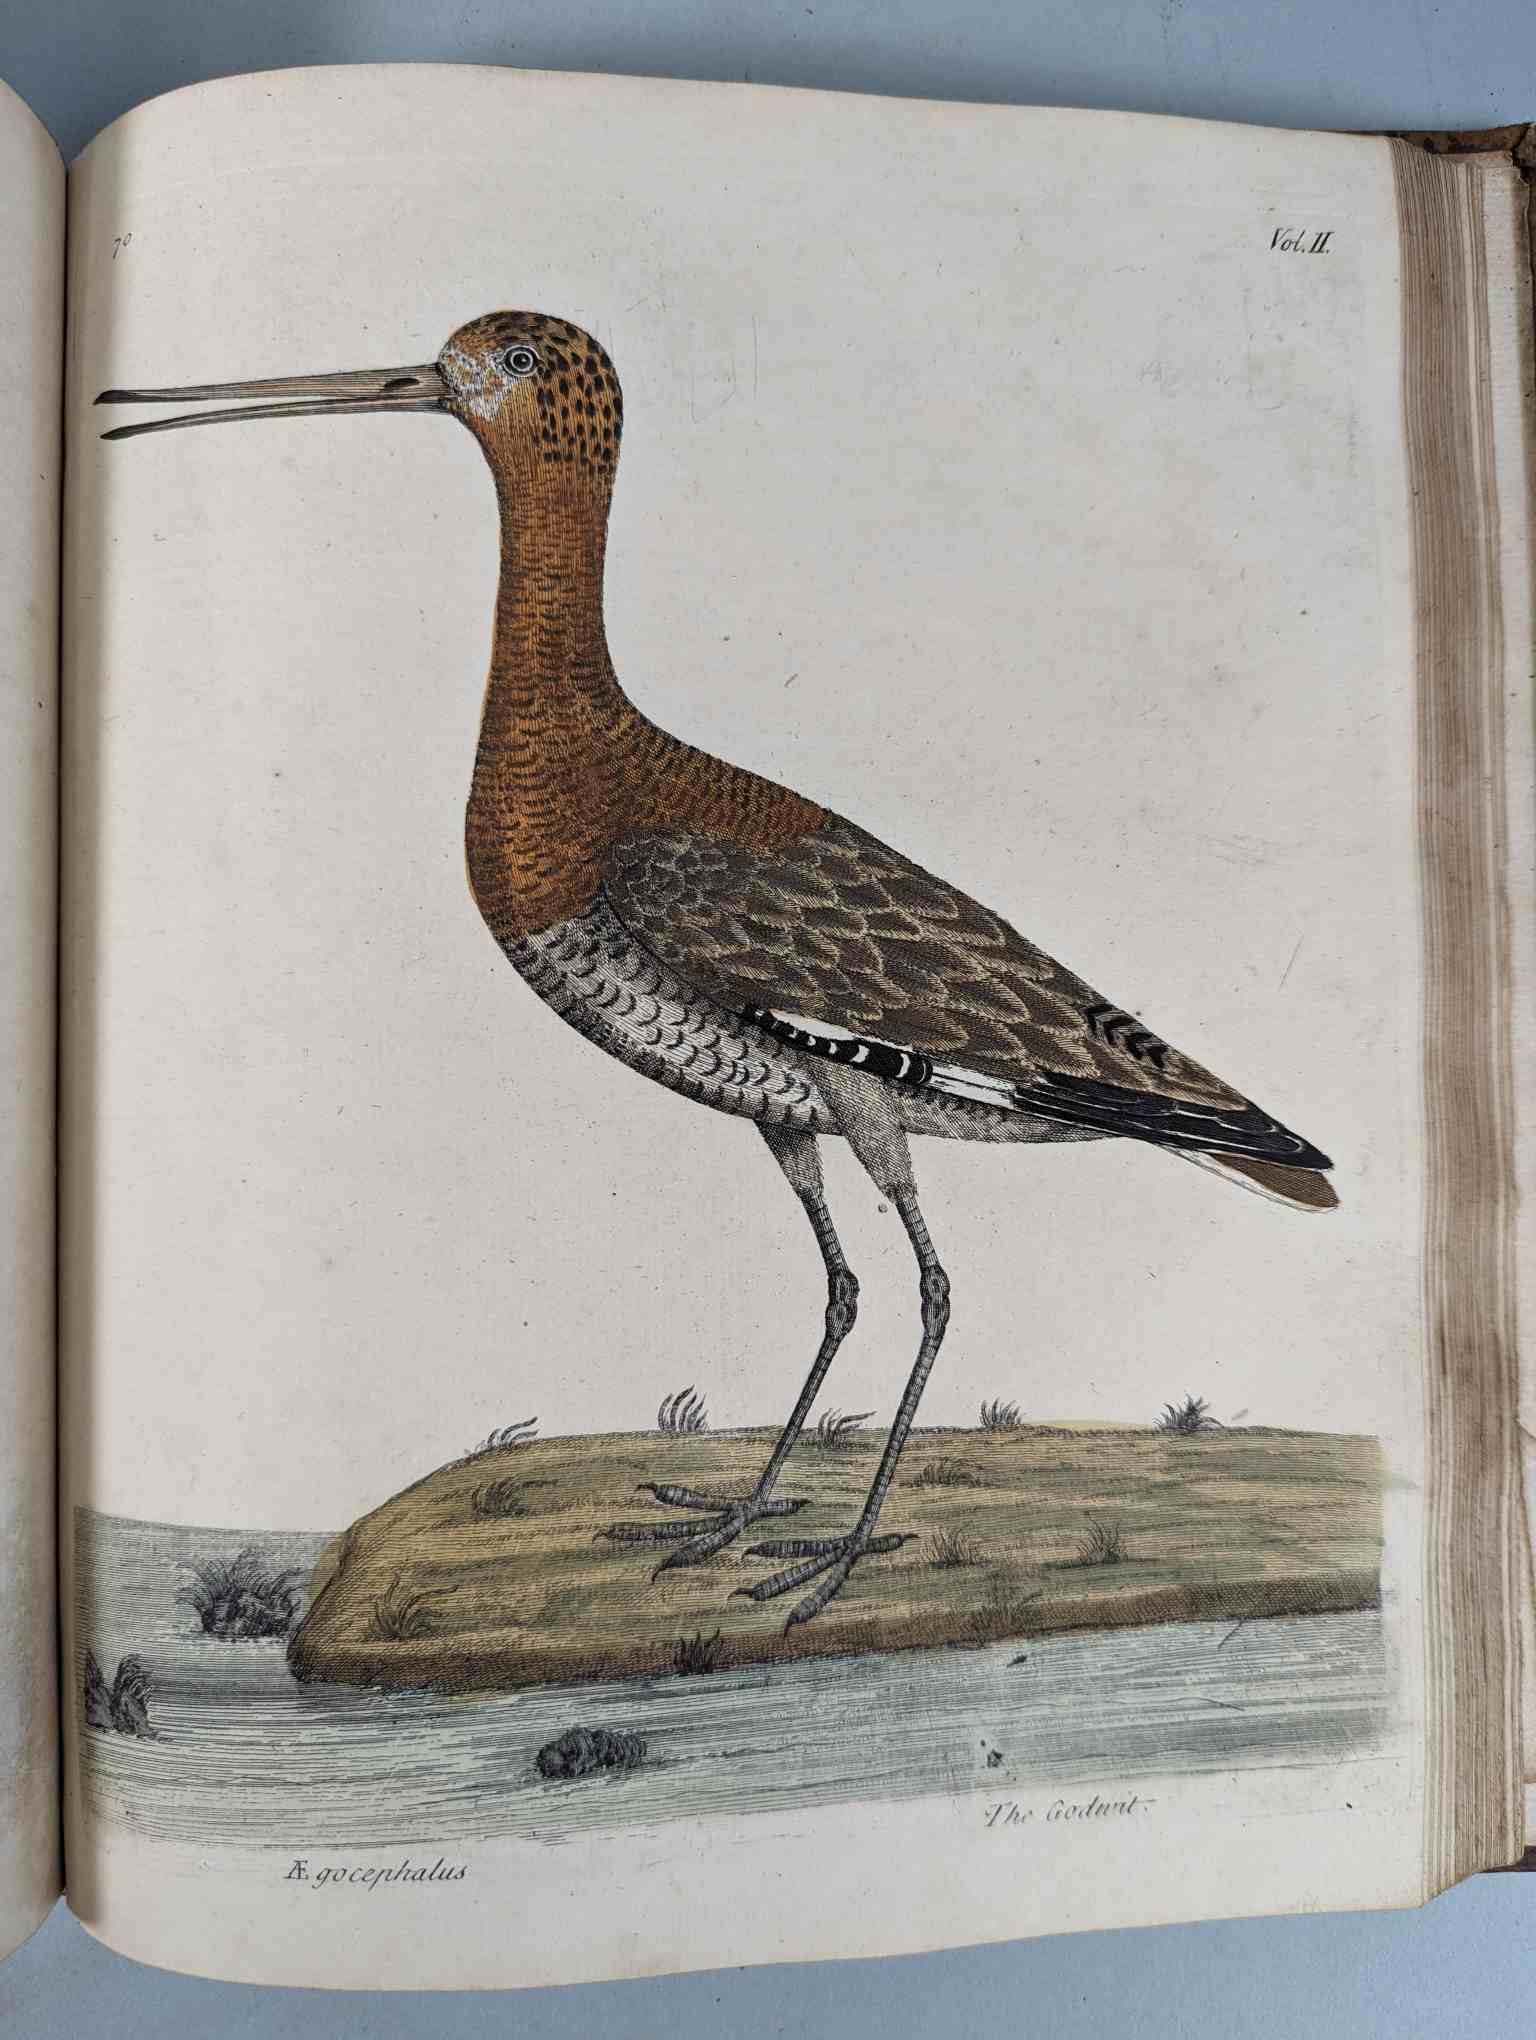 ALBIN, Eleazar. A Natural History of Birds, to which are added, Notes and Observations by W. - Image 174 of 208